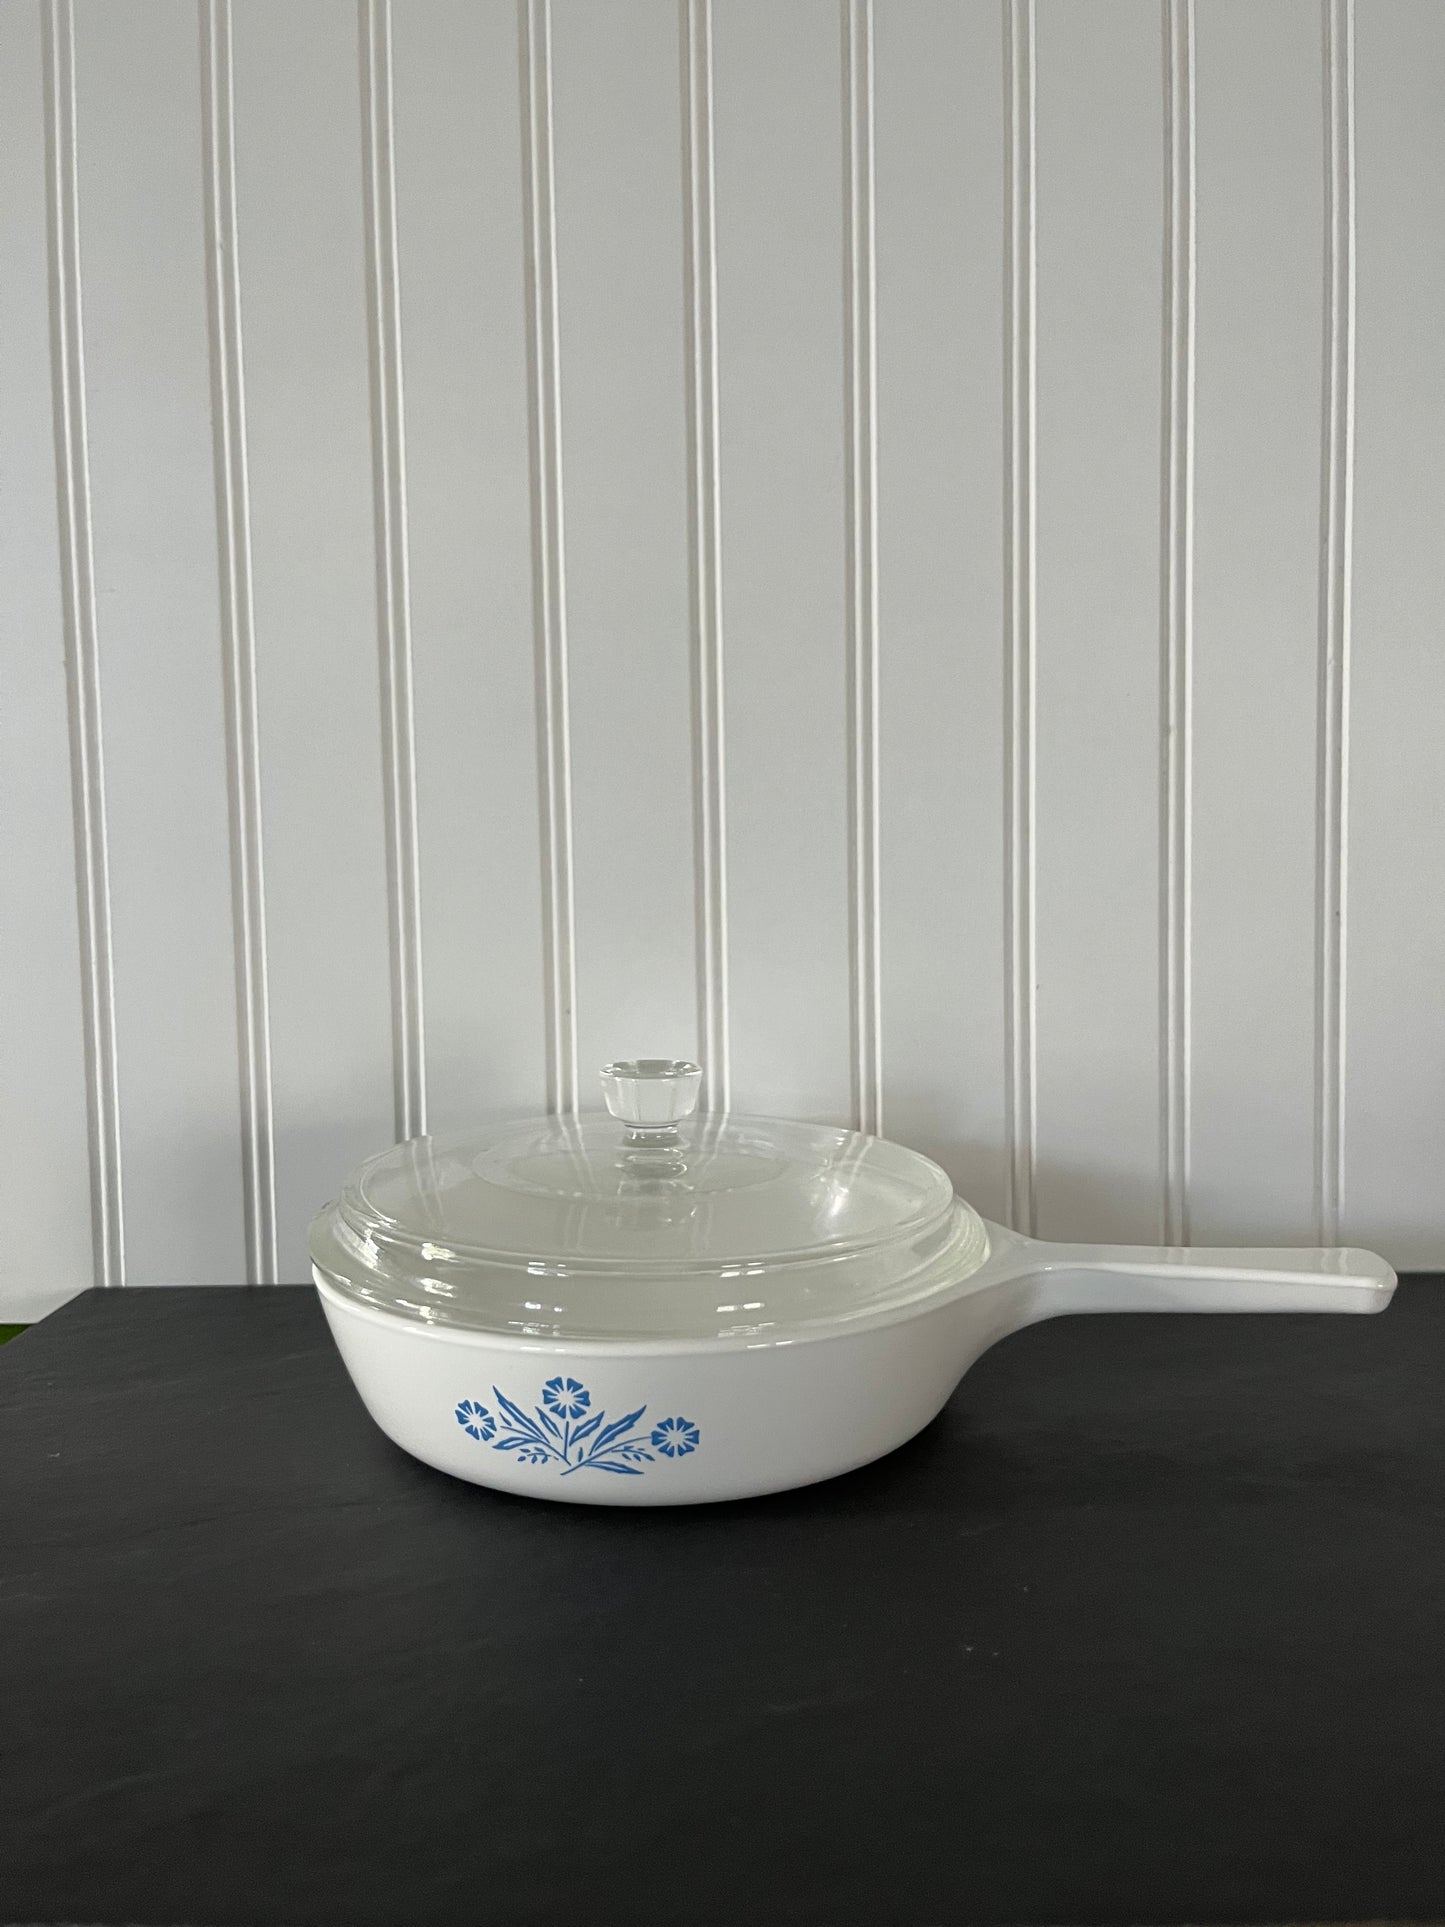 Vintage Corning ware Cornflower Blue on White White Menuette Pan with Lid - P-83-B 6.5"